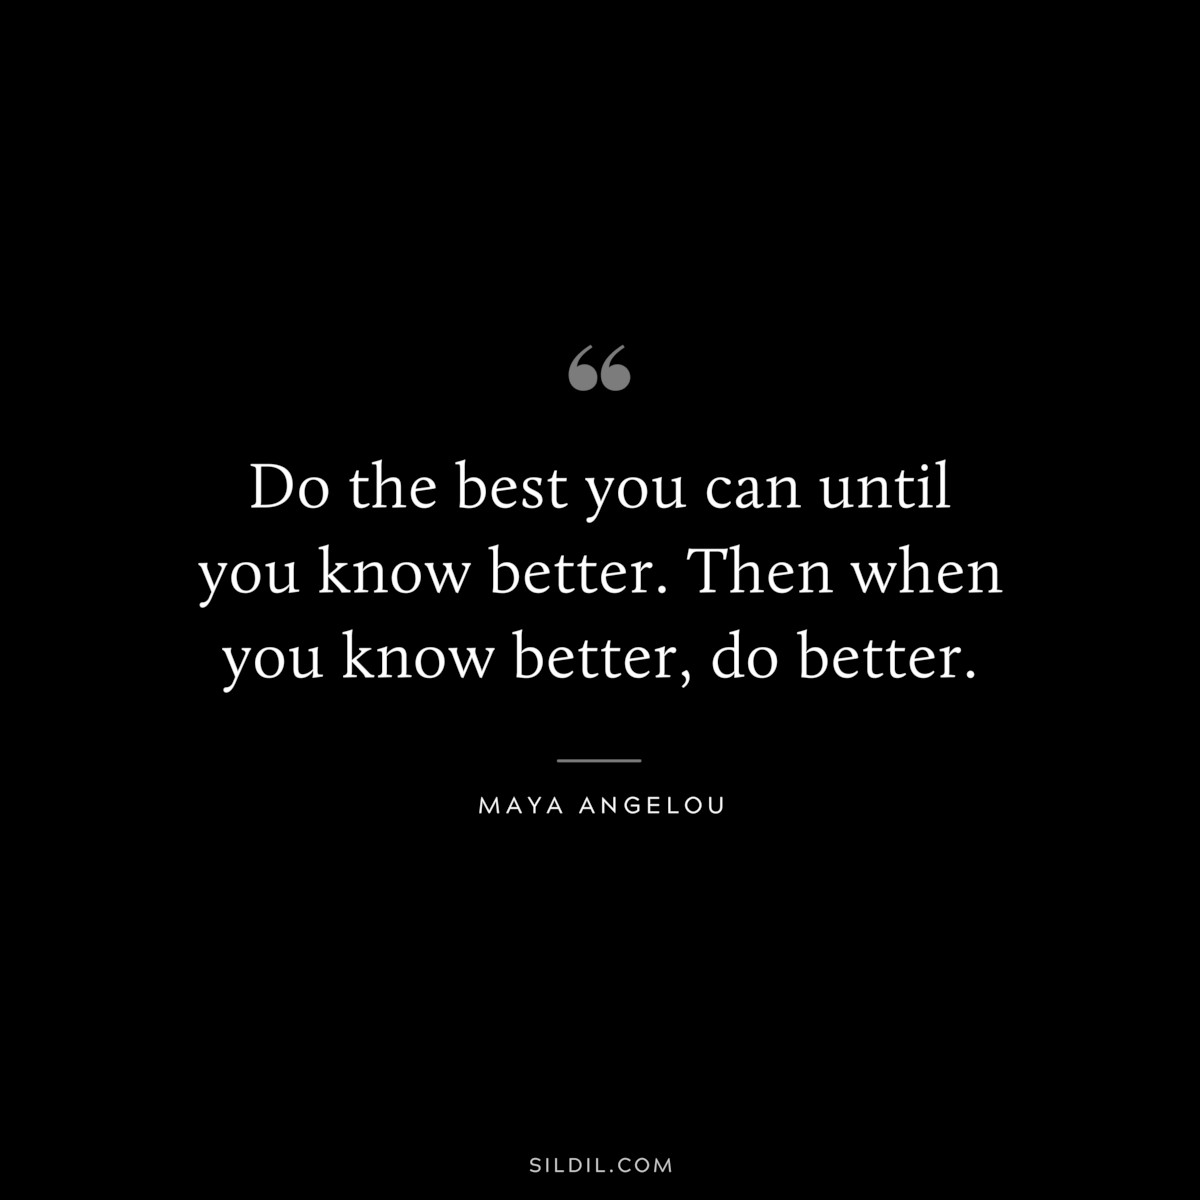 Do the best you can until you know better. Then when you know better, do better. ― Maya Angelou